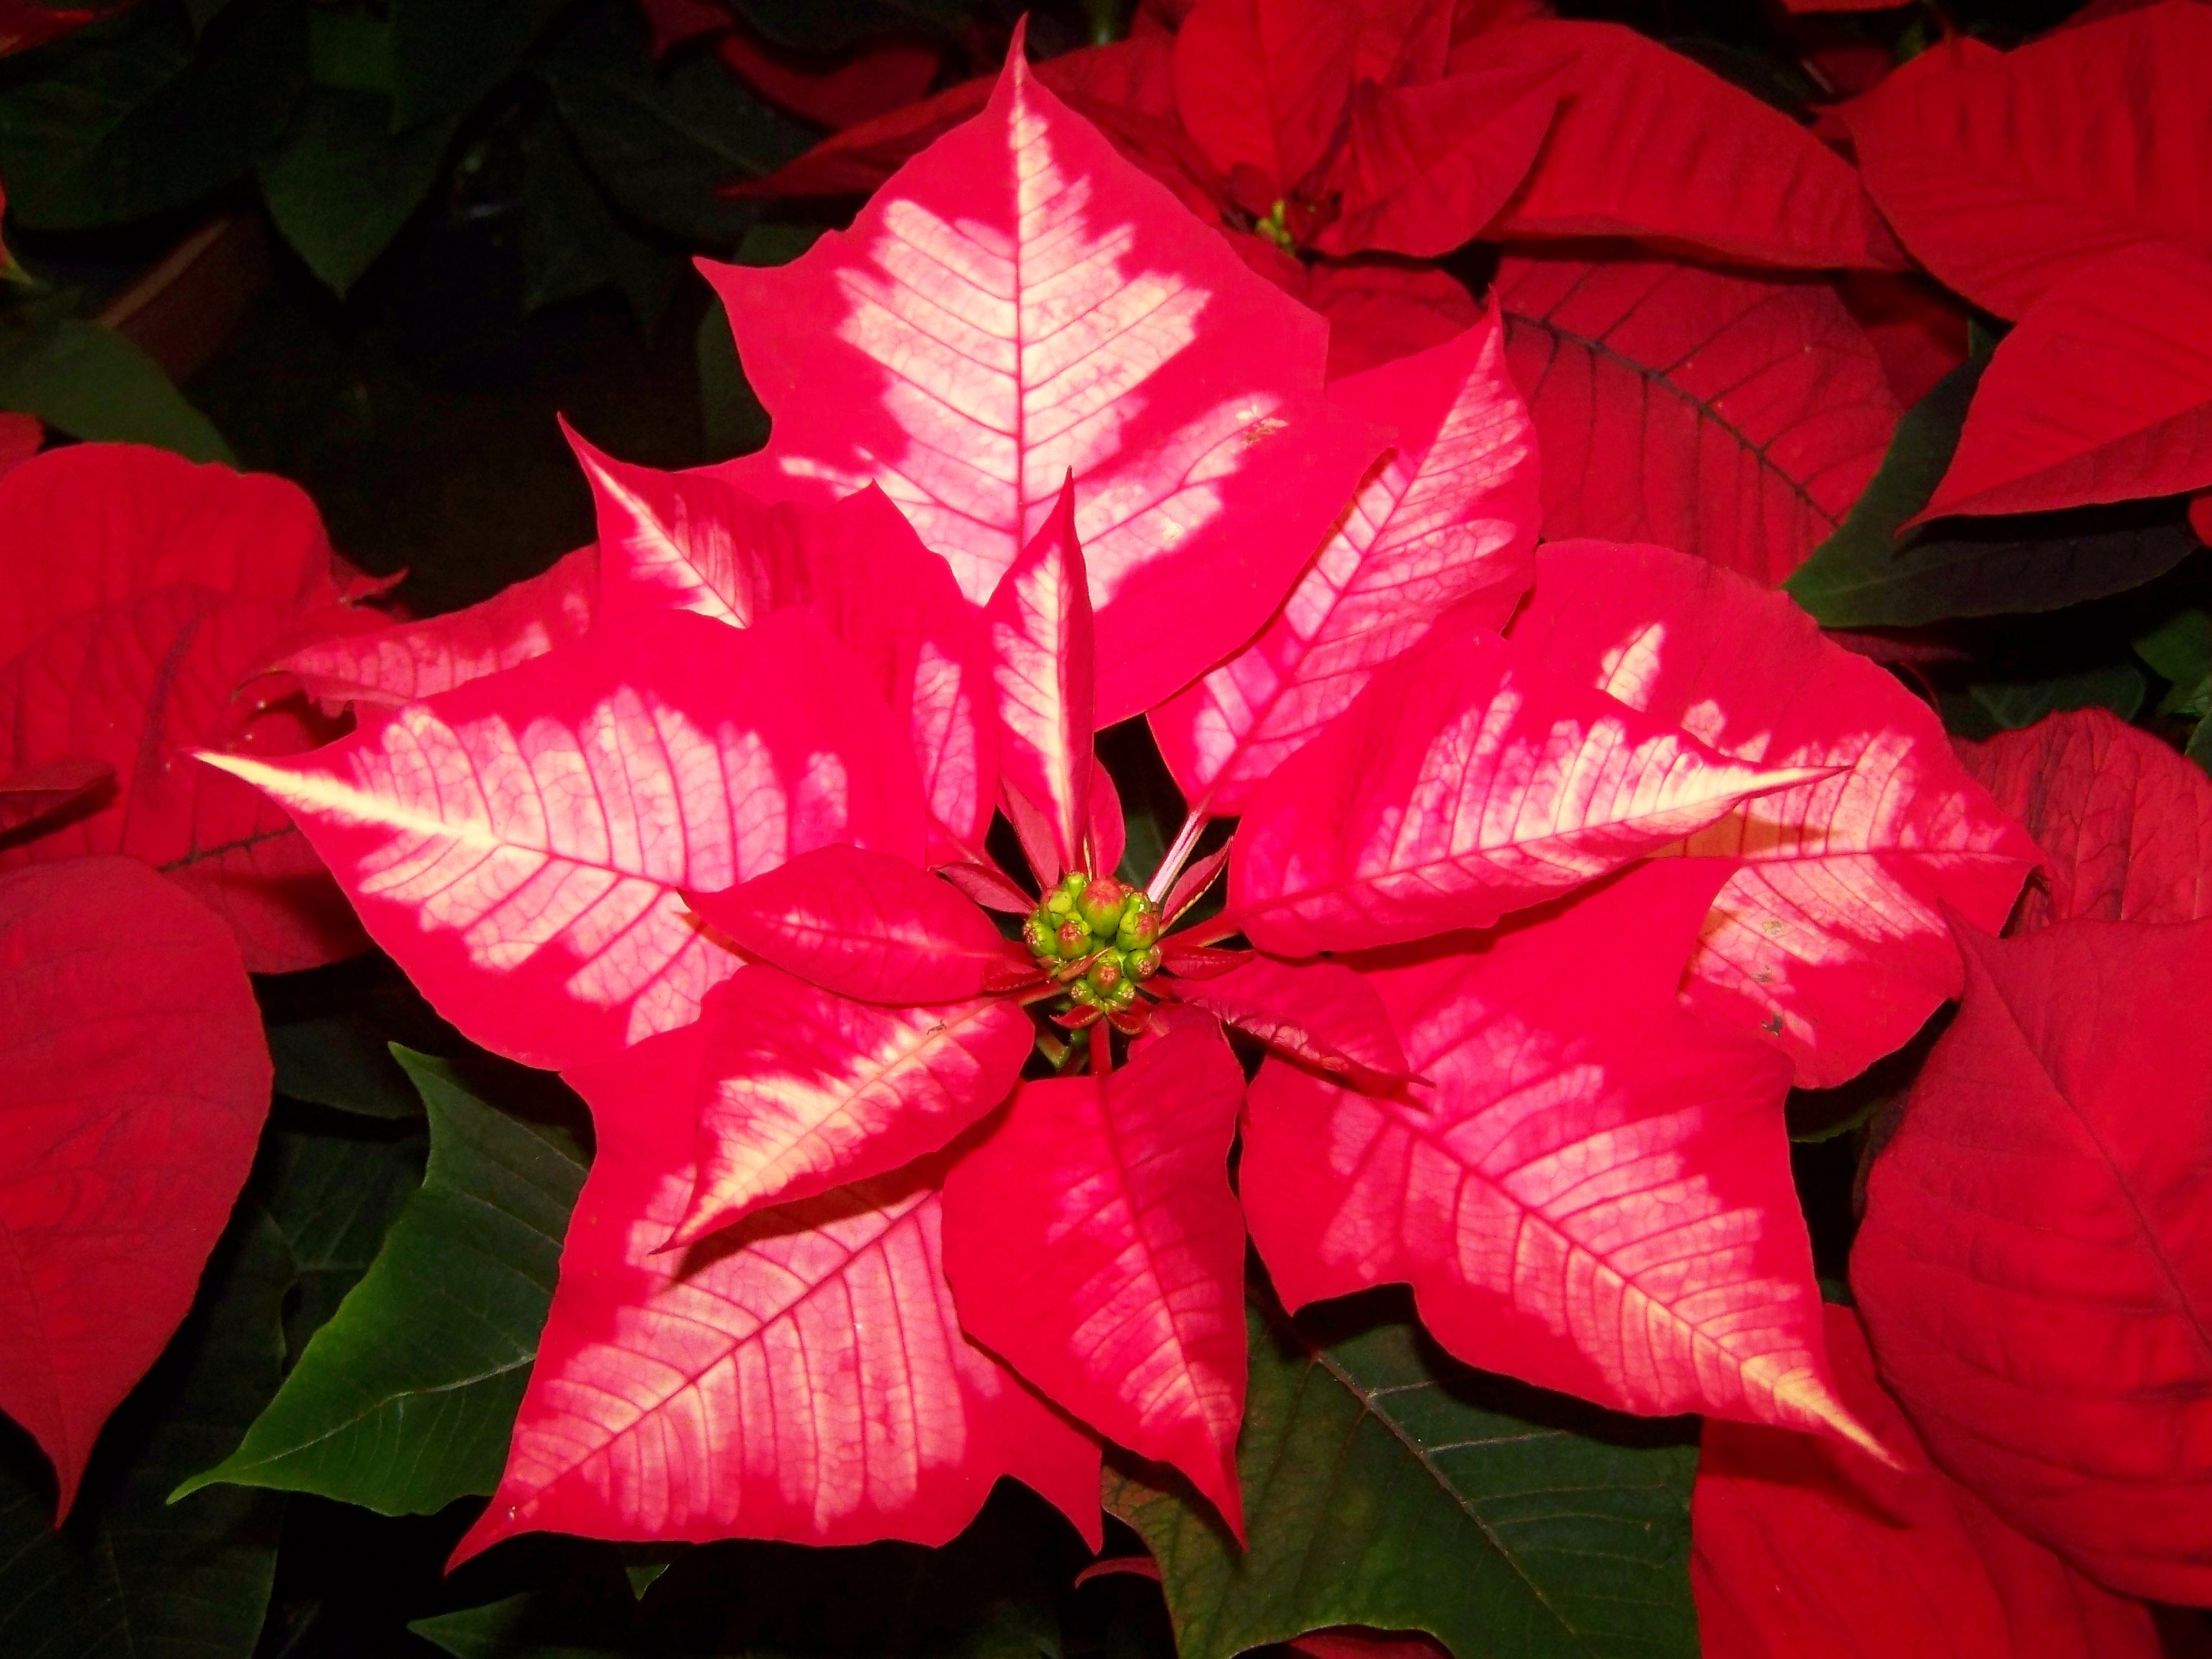 red poinsettia in close up photography